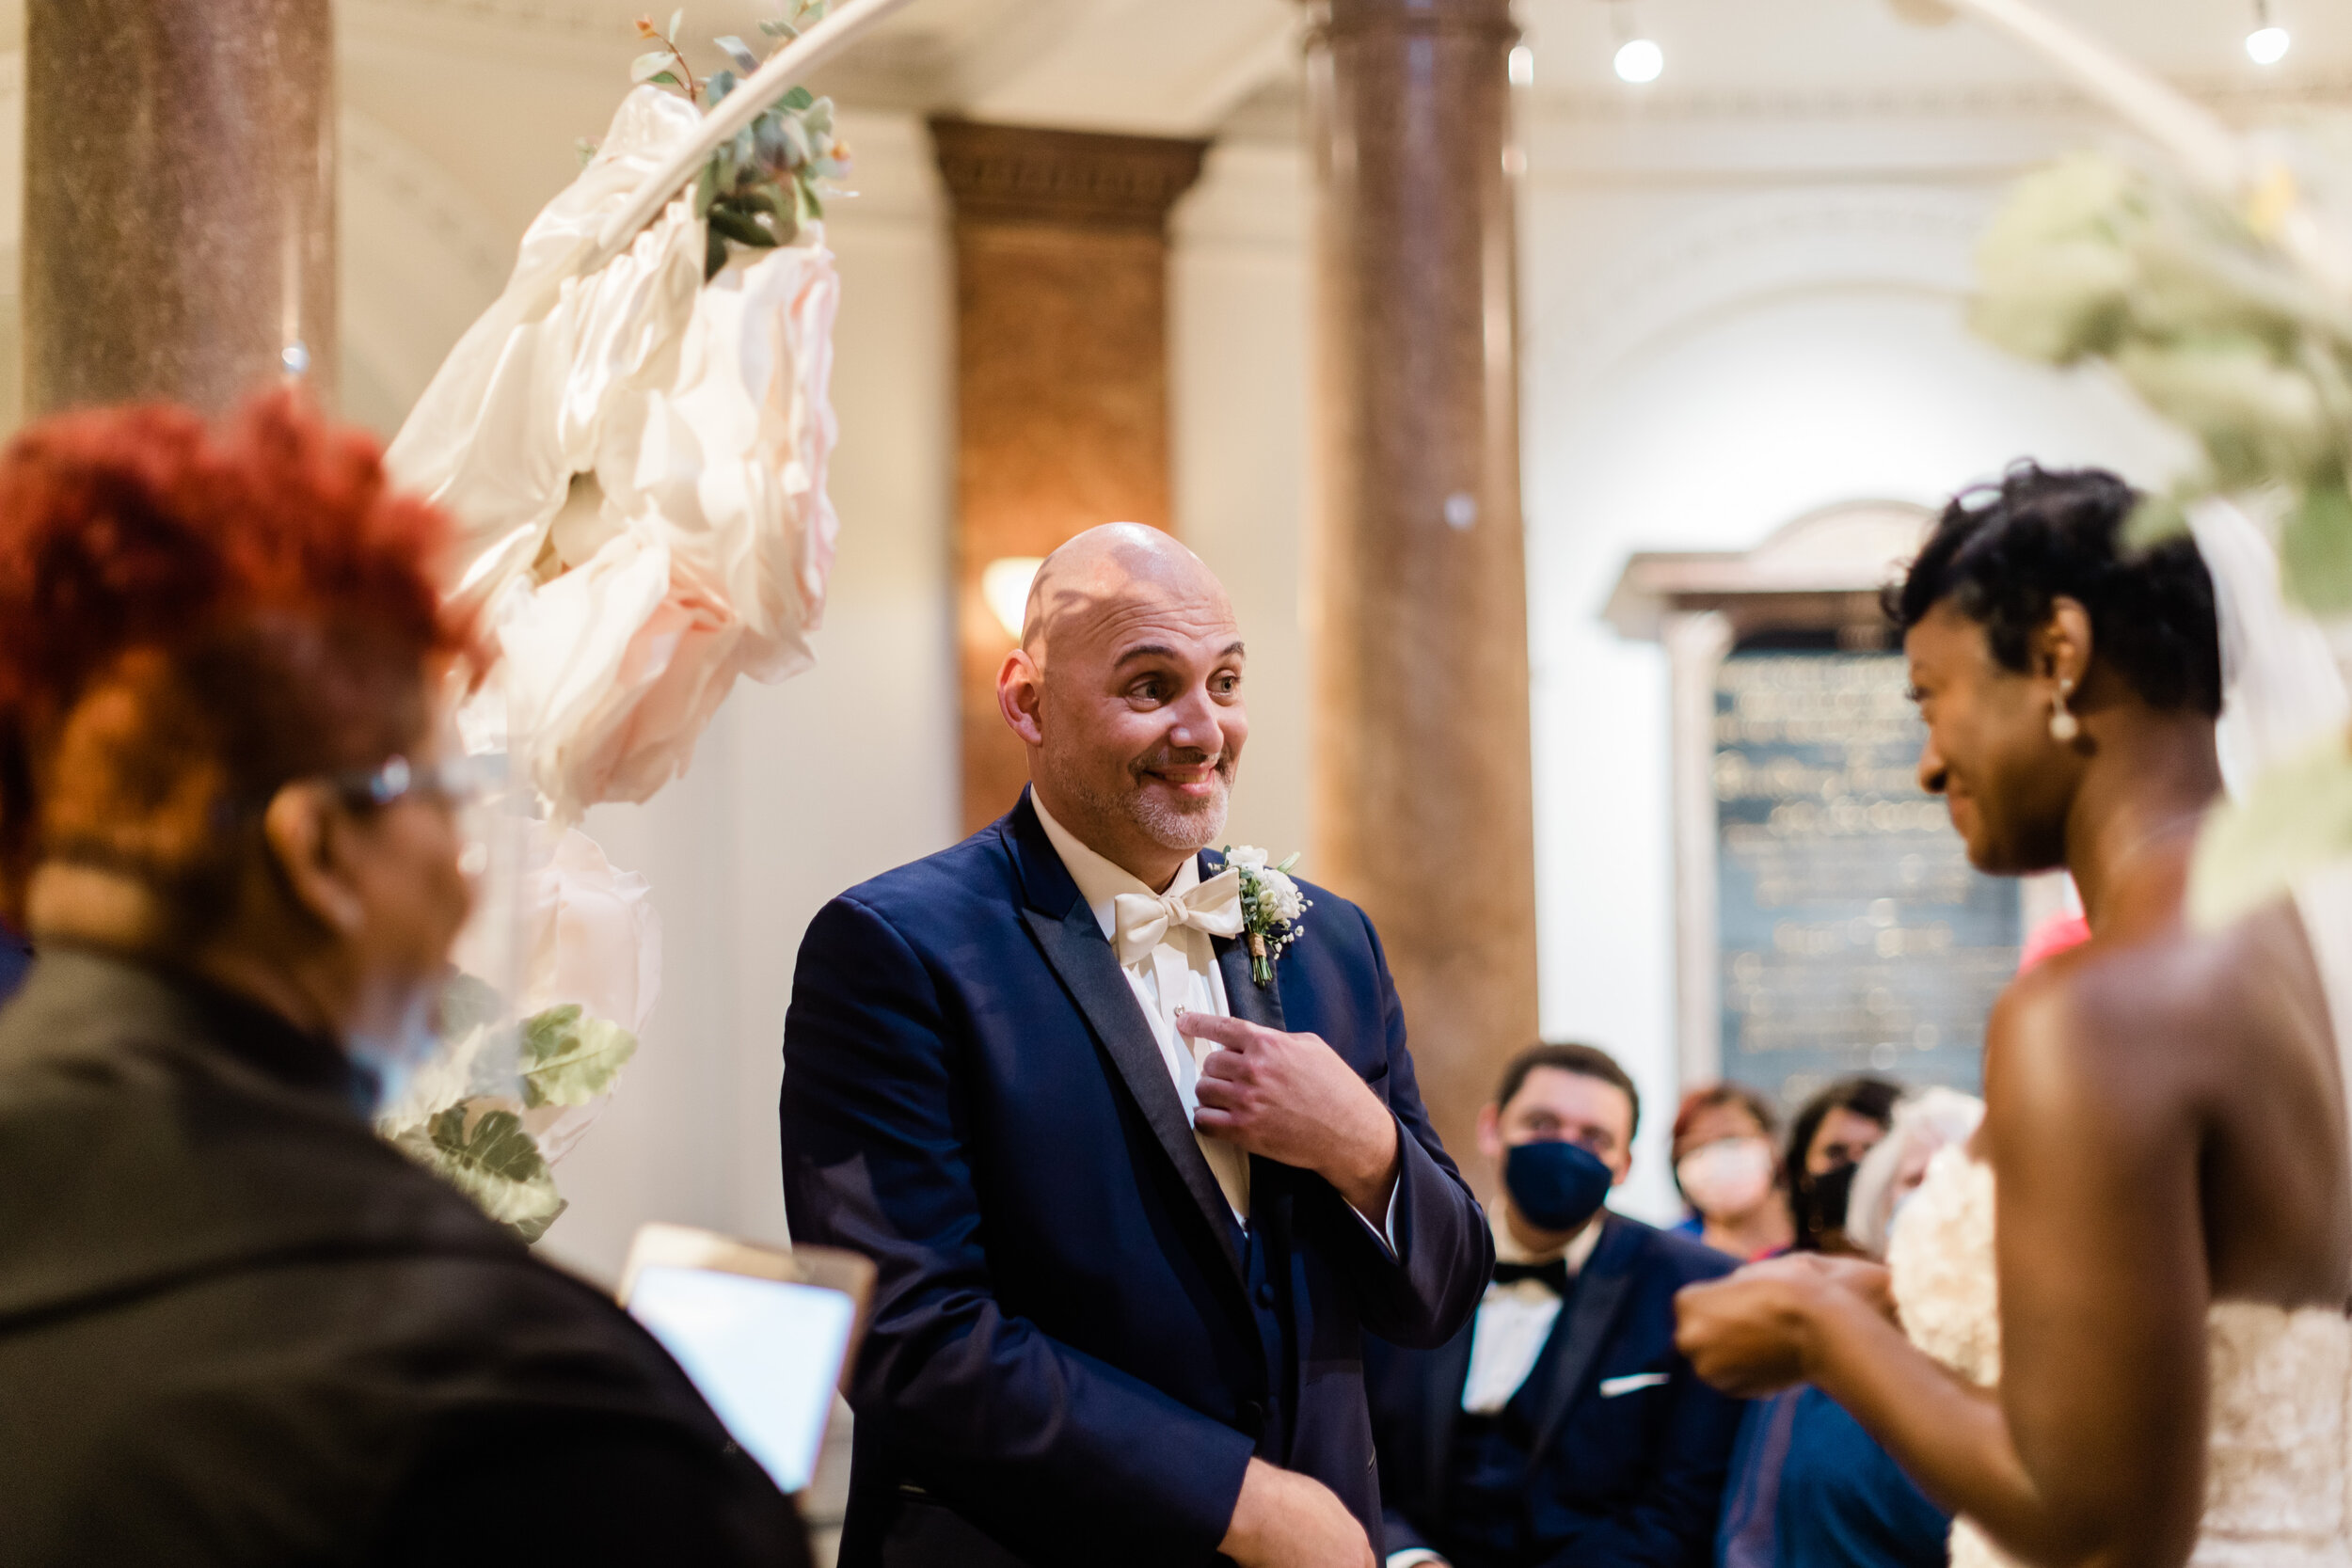 get married in baltimore city hall shot by megapixels media biracial couple wedding photographers maryland-69.jpg